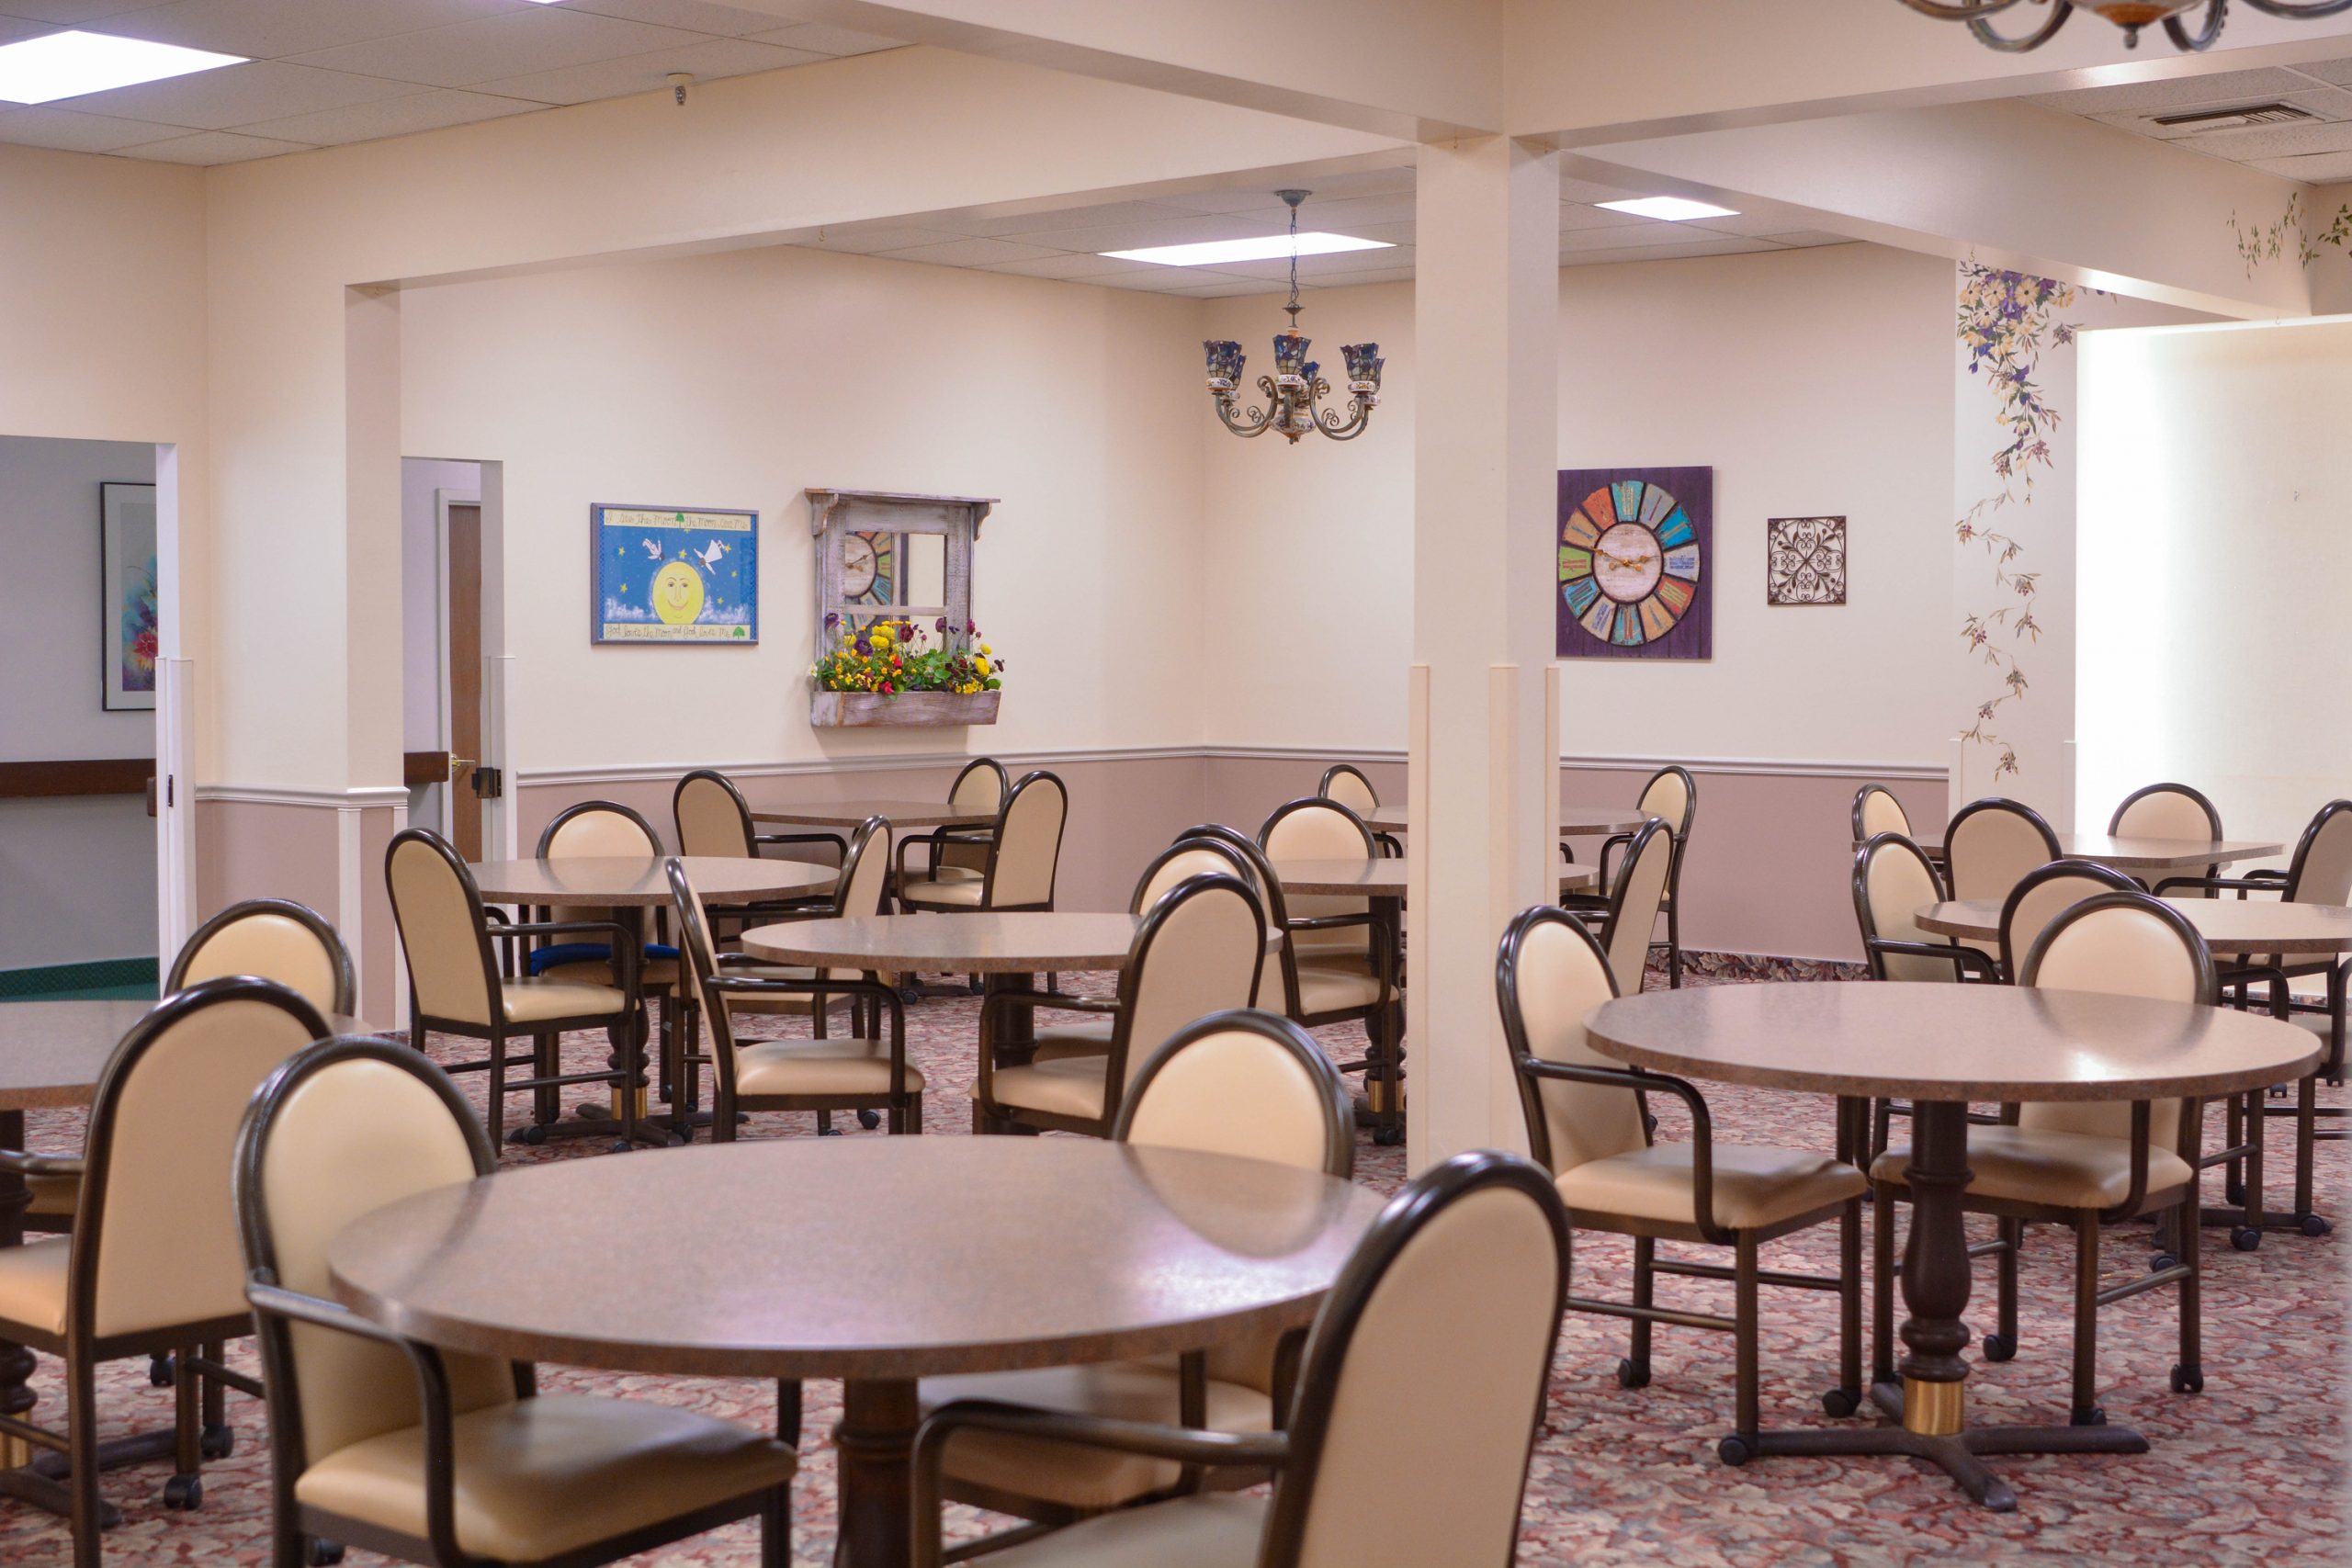 Gardens Assisted Living dining area